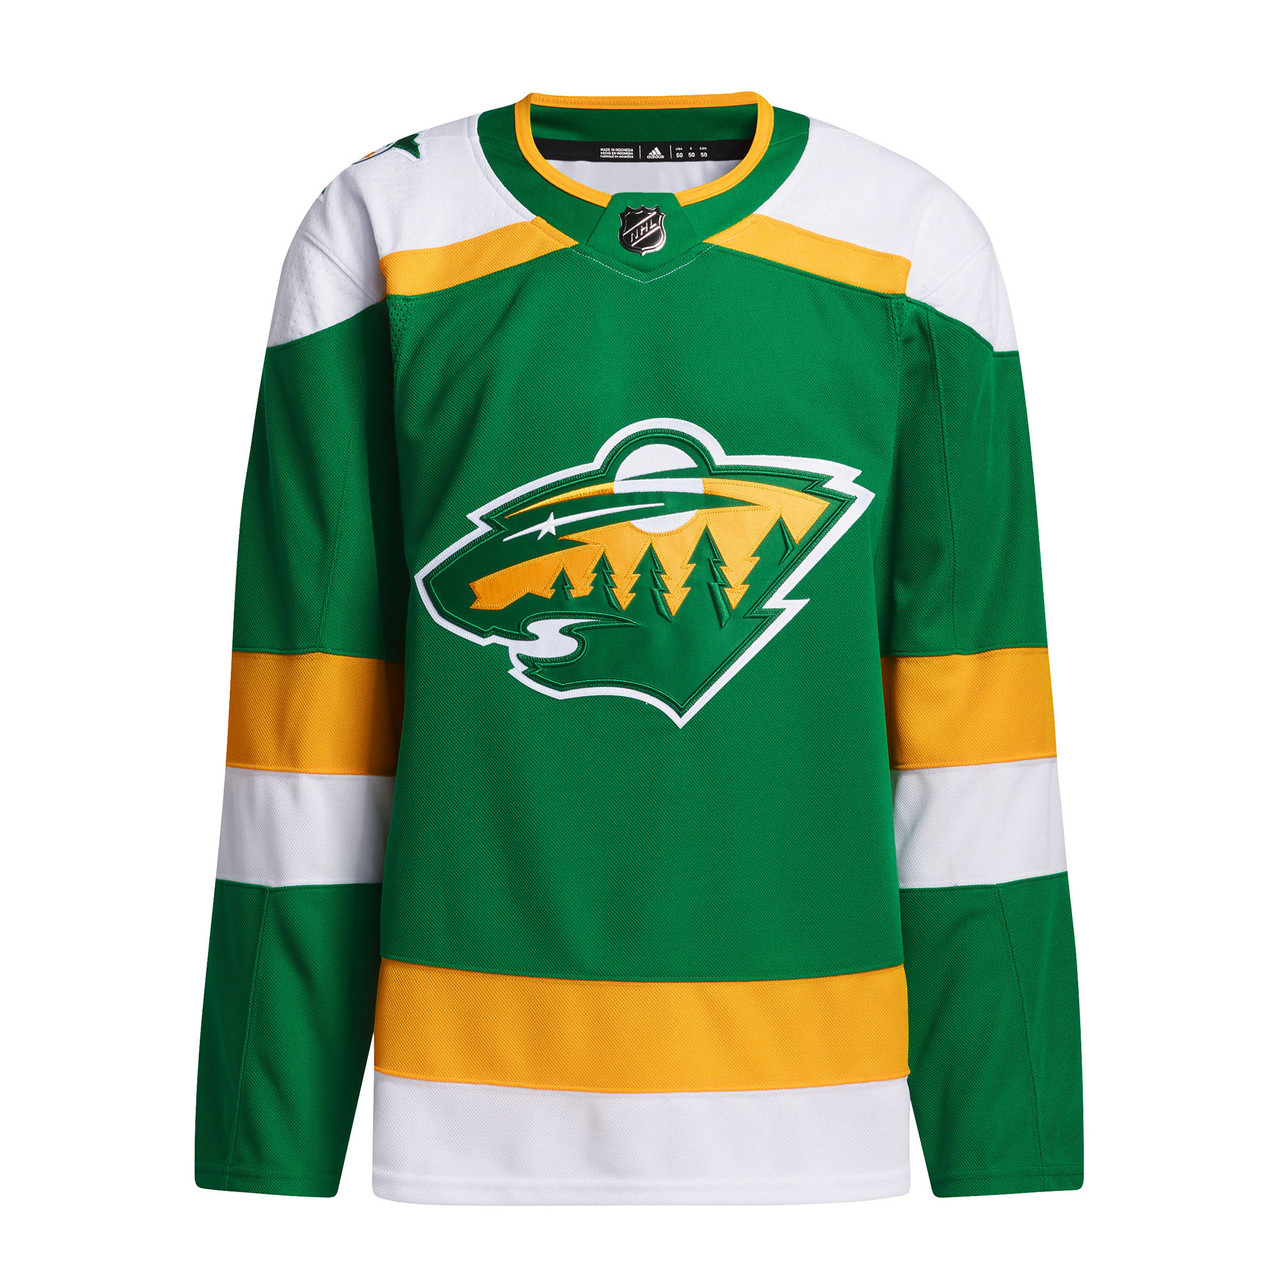 What Should the Wild Do With Their Next Reverse Retro Jerseys